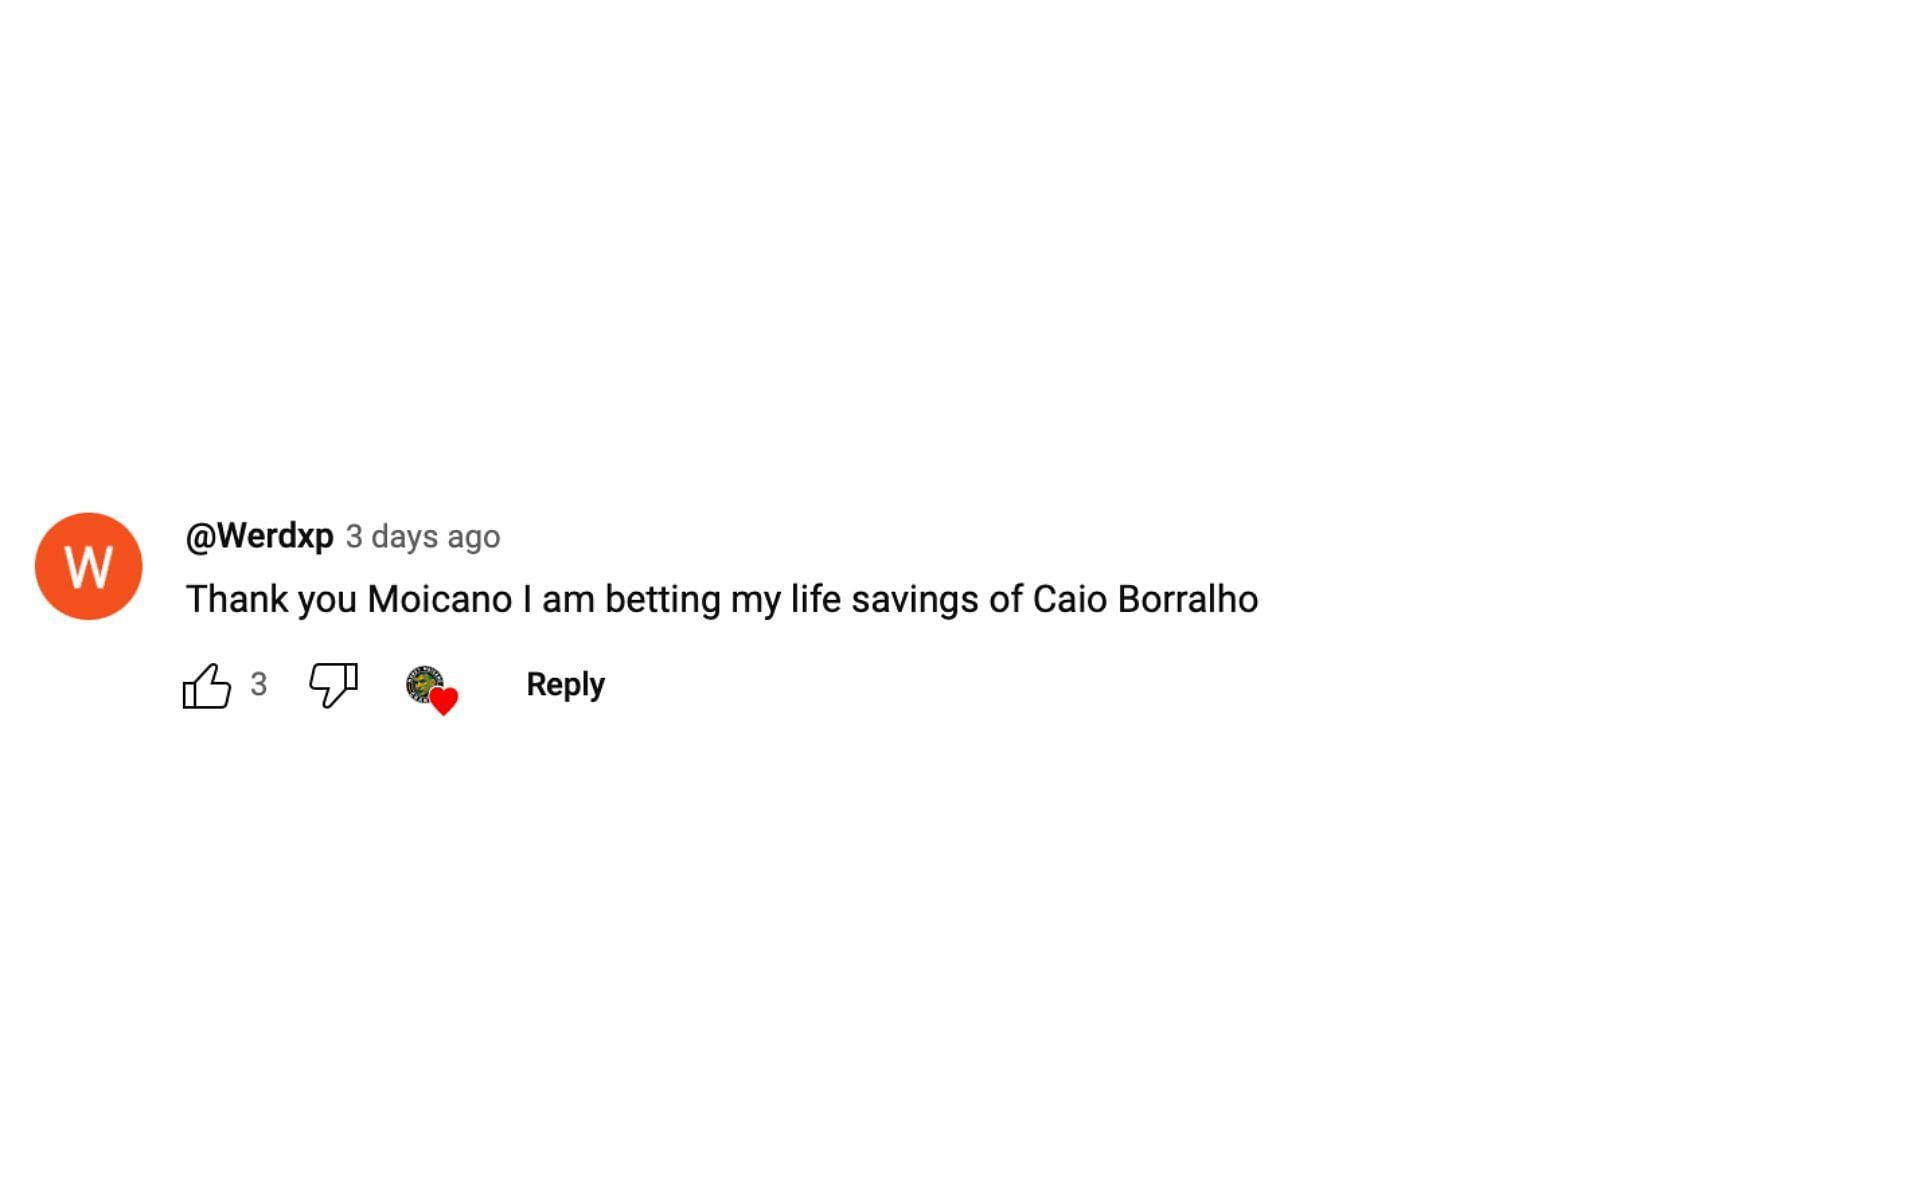 Fan claiming he would bet his &quot;life savings&quot; on Caio Borralho [via Money Moicano on YouTube]